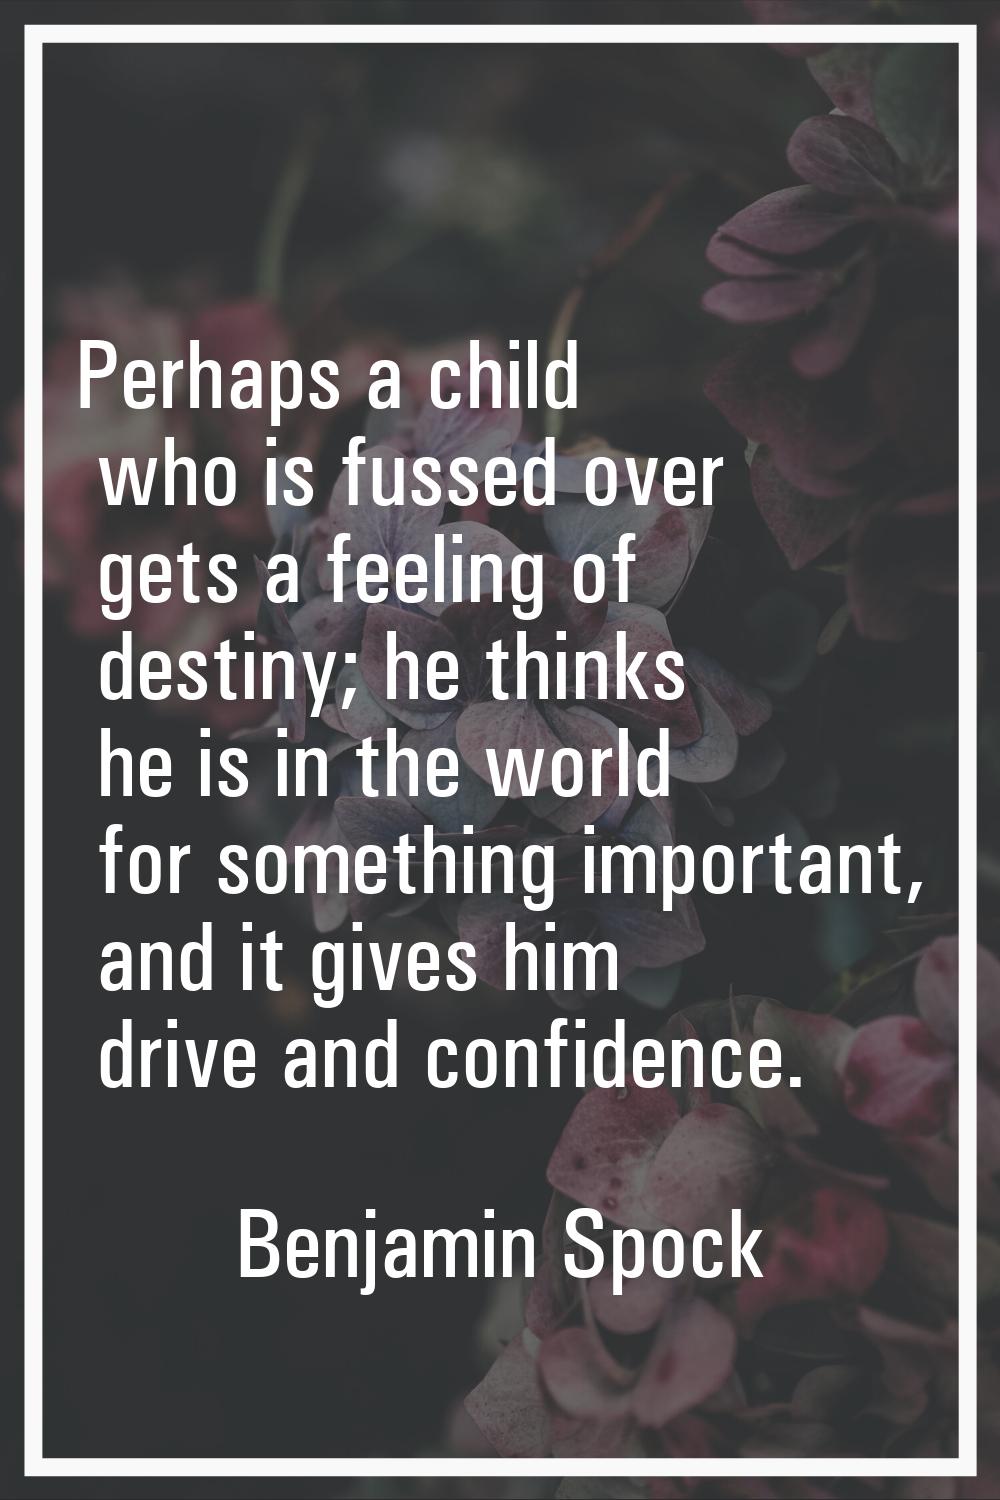 Perhaps a child who is fussed over gets a feeling of destiny; he thinks he is in the world for some